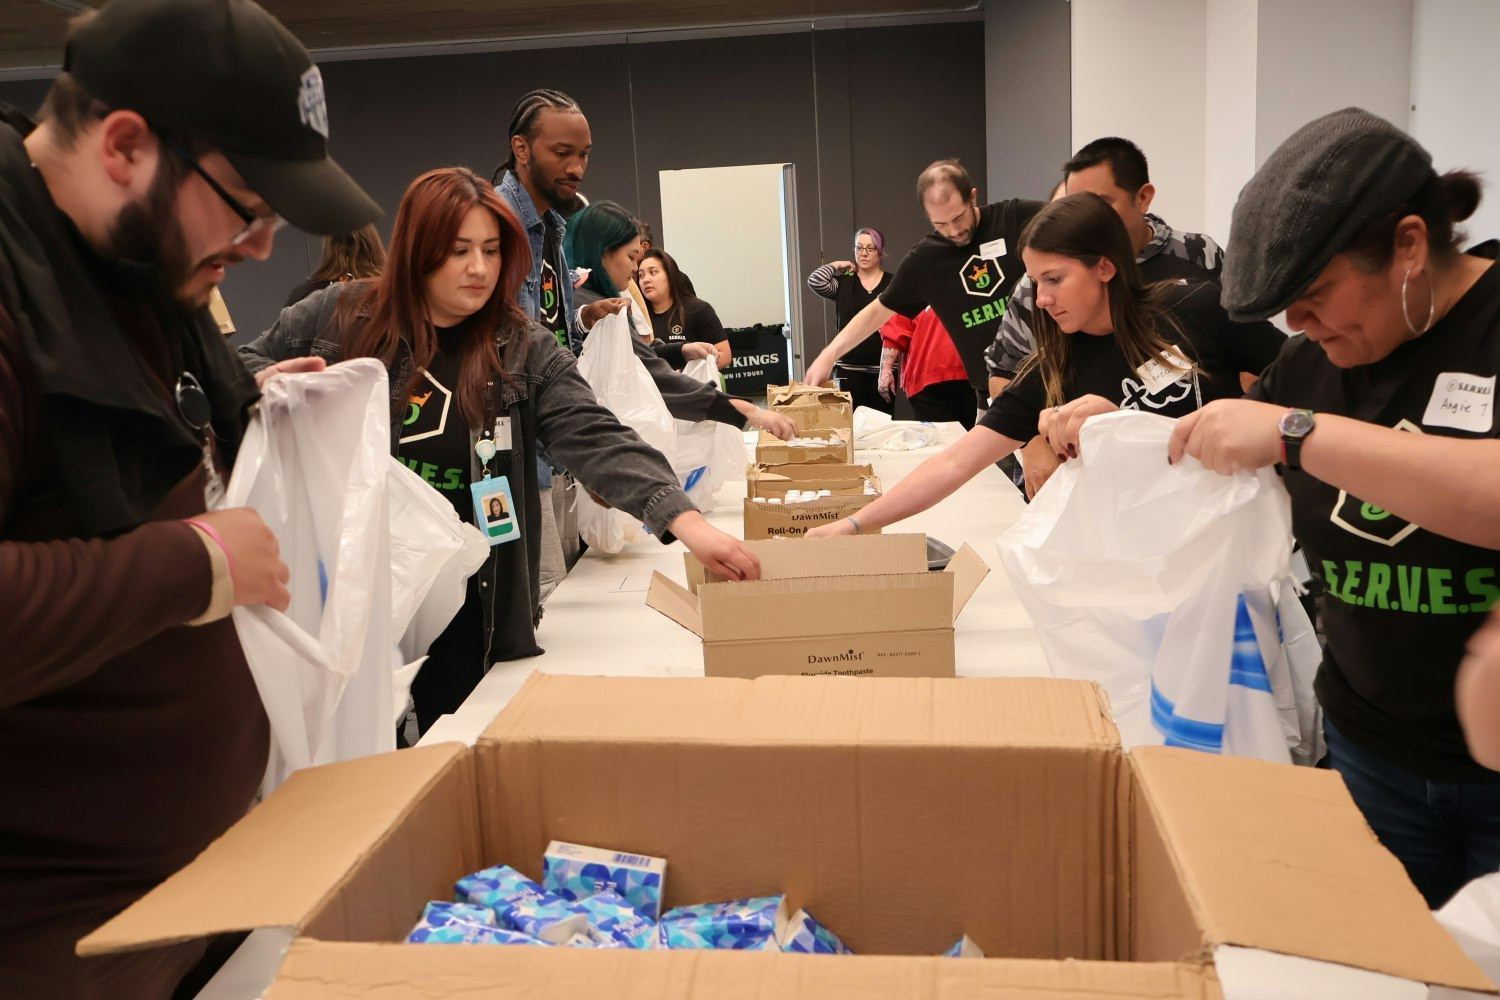 We teamed up with United Way to assemble over 4,500 essential care packages for women.